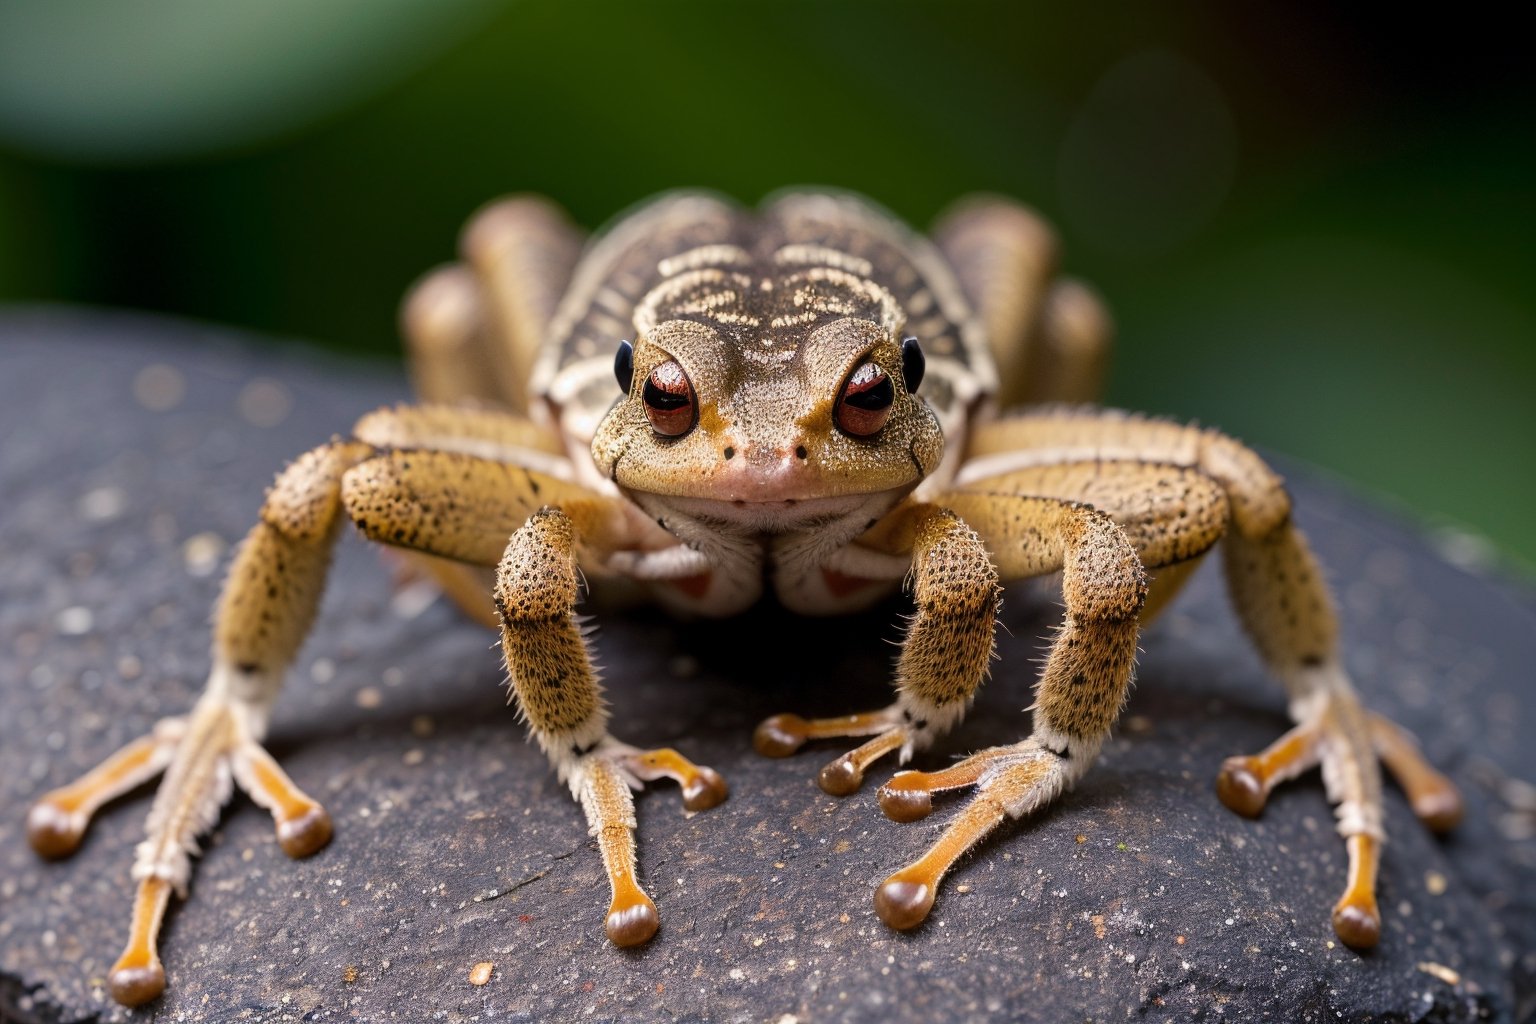 (best quality, 8K, ultra-detailed, masterpiece), (ultra-realistic, photorealistic), A Wolf Spider body, hair eyes, and legs but with a Red-Eyed Tree Frog's skin and eye colors and textures.  The body will be that of a Wolf Spider, but will not have any brown skin tones or black eyes.  The Wolf Spider's body will have the vibriant skin color and detailed skin texture of a Red-Eyed Tree Frog.  The Wolf Spider will have all it's multiple set of eyes, but with the coloring of the Red-Eyed Tree Frog instead of the Wolf Spider's trademark solid black.  Craft an awe-inspiring 8K masterpiece showcasing a Wolf Spider's body with the anatomically correct number of eyes and legs of a Wolf Spider along with the Wolf Spider's long hairs, but it will bare the markings and colorings with extremely realistic and detailed Red-Eyed Tree Frog's coloring, skin texture, The Wolf Spider's unnerving multiple sets of eyes which are four small eyes in the lowest row, two very large eyes in a middle row, and two medium-sized eyes in a top row on the Wolf Spider's head and are stariing directly at the camera, but the color of the eyes are not black but while the eyes are the same size of eyes and at the same location on the head of a Wolf Spider the eyes have the coloring a Red-Eyed Tree Frog. The jaws are prominent and strong.will be present but instead of brown toned they will have the coloring of the Tree Frog.  Ensure meticulous detail in the Wolf Spider's body, legs, hair, number of eyes but replace the Wolf Spider's normal brown tones with the Red-Eyed Tree Frog's skin vibrant color, and skin texture, and elegant movement. This artwork should capture the Wolf Spider's enigmatic nature, revealing its unique beauty with the Wolf Spider presence but with the Red-Eyed Tree Frog's colors with unparalleled realism. make the Wolf Spider a stunning and unforgettable subject showing the entire spider's body from head to toe as it shows its Red-Eyed Tree Frog's vibrant skin colors and eye colors.  The background will be obviously in the Wolf Spider's natural habitat. The surface in the Spider's natural habitat's texture will be in impressive detail and realism. 